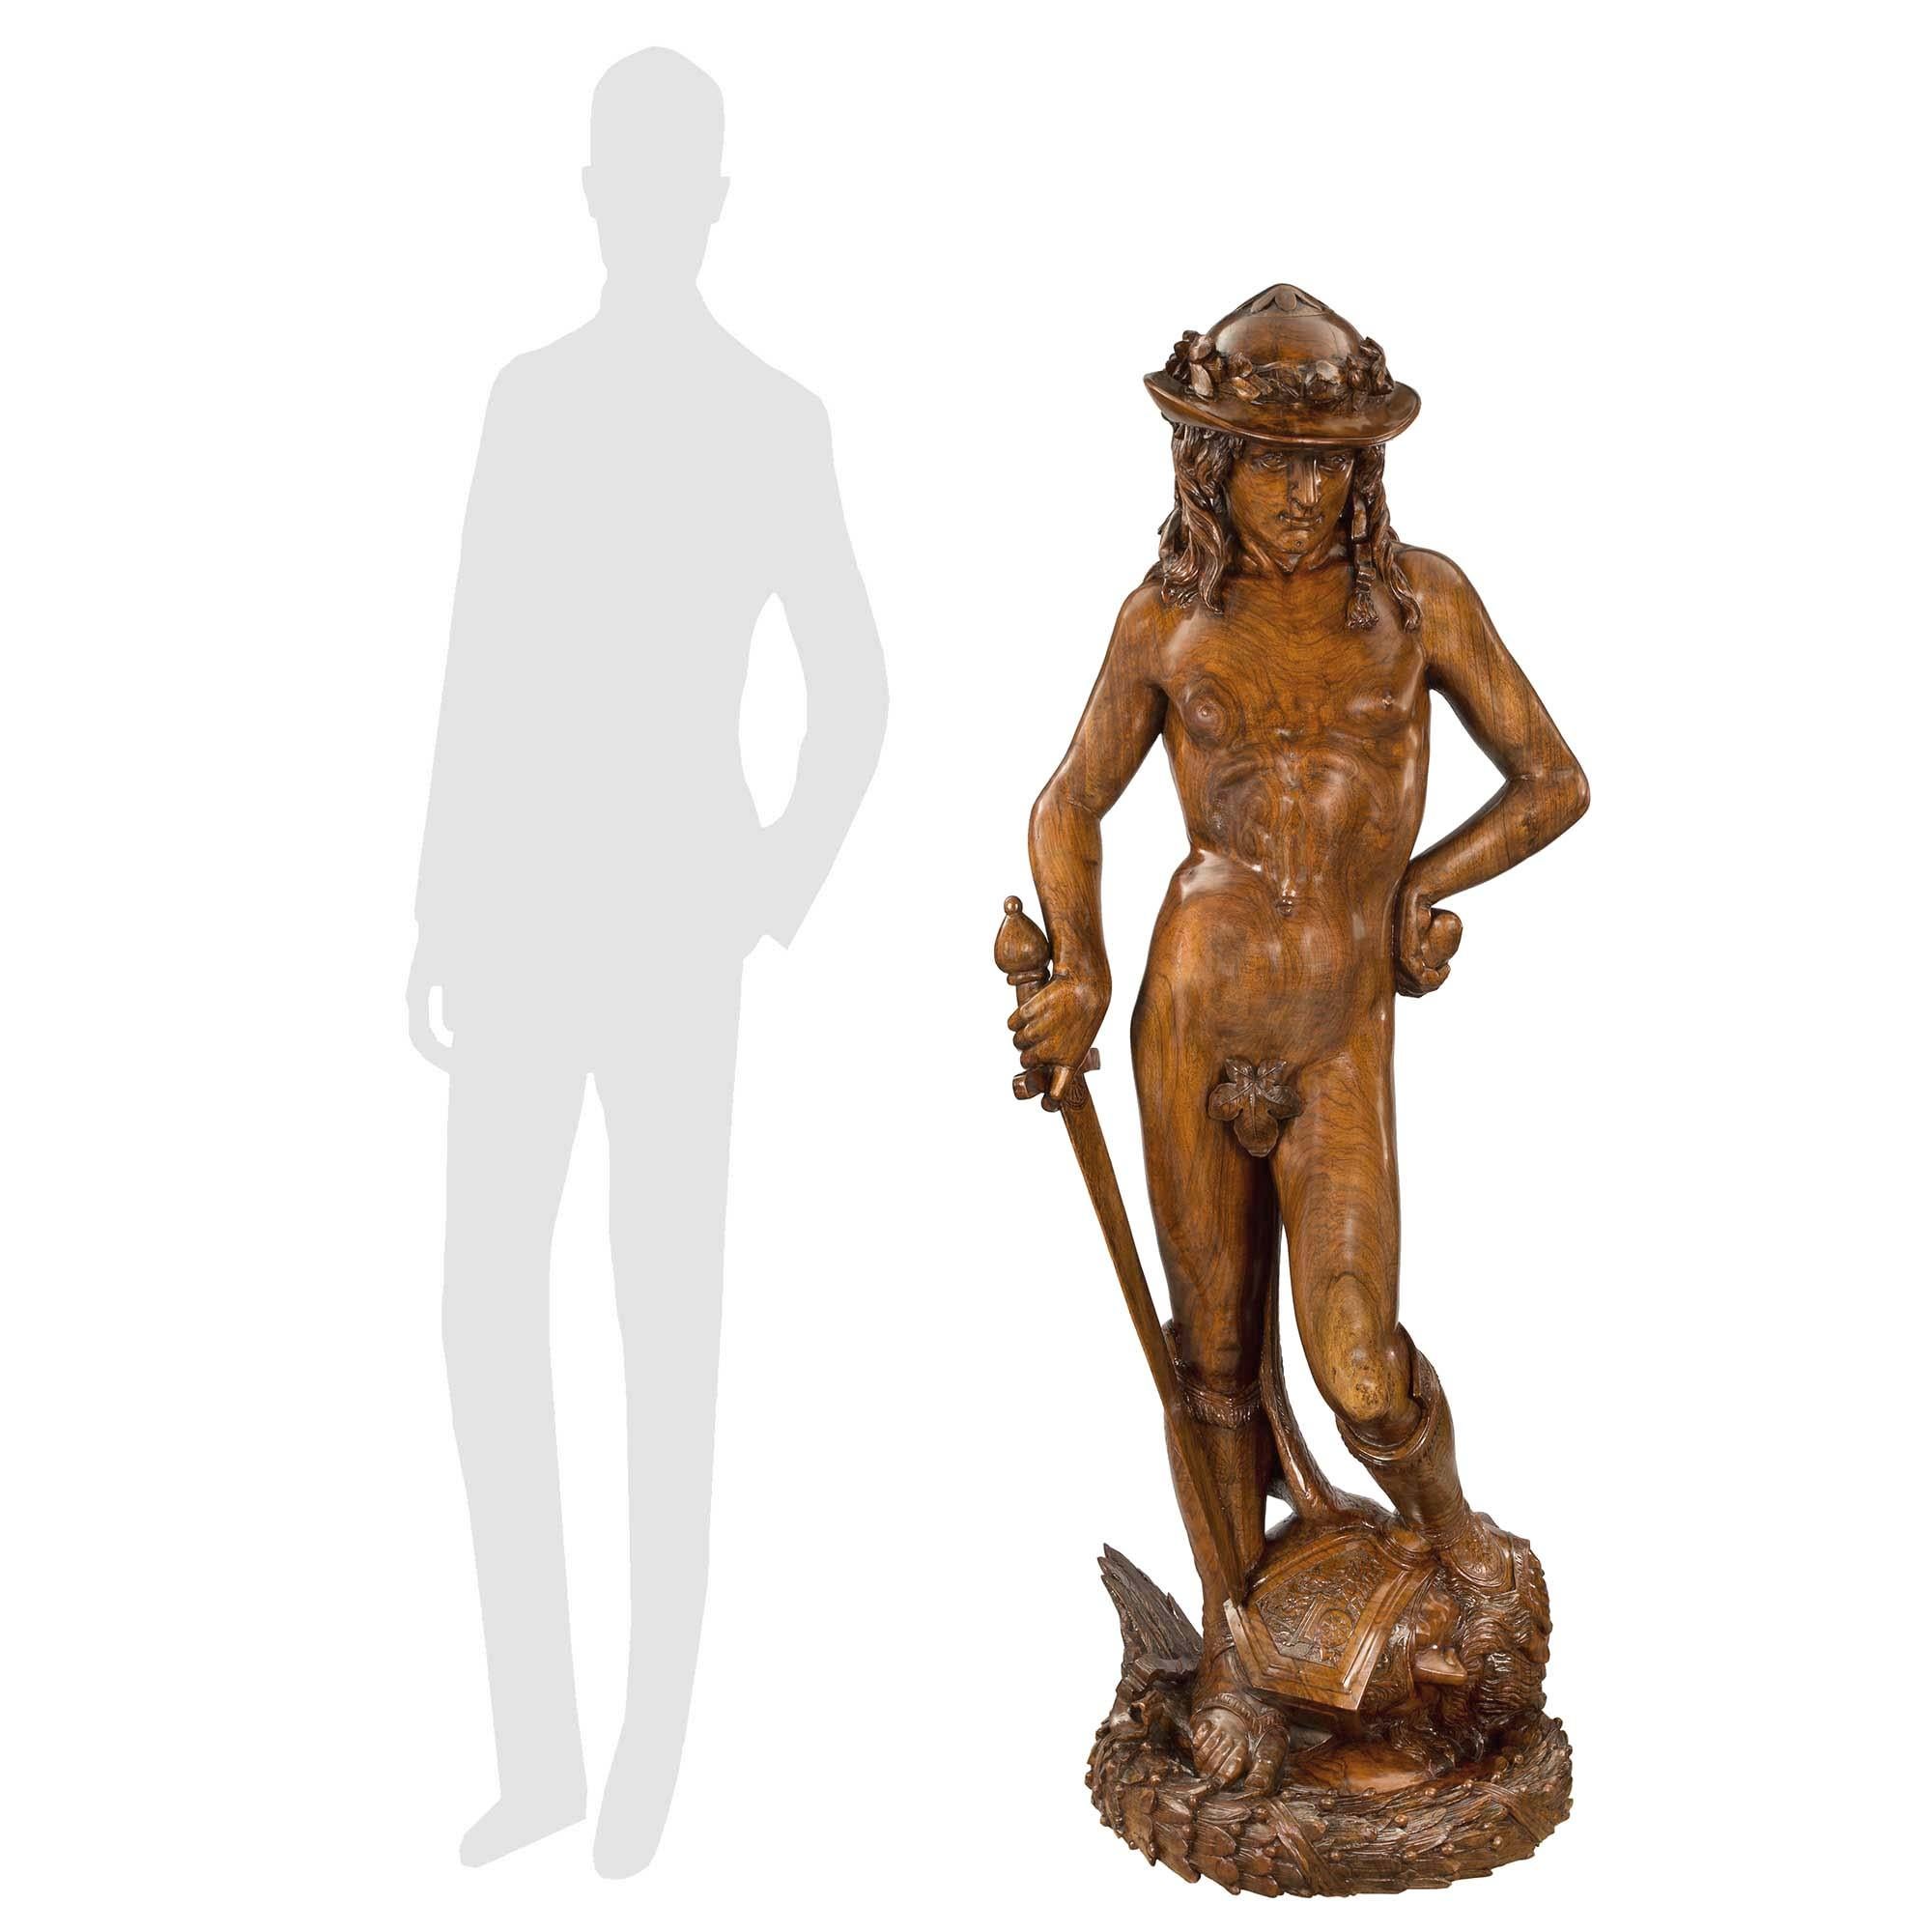 A striking and most impressive French late 18th early 19th century solid walnut of David having slain Goliath signed A. Mercié. The statue is raised by a finely carved wrap-around berried laurel band where David stands. The handsome David wears